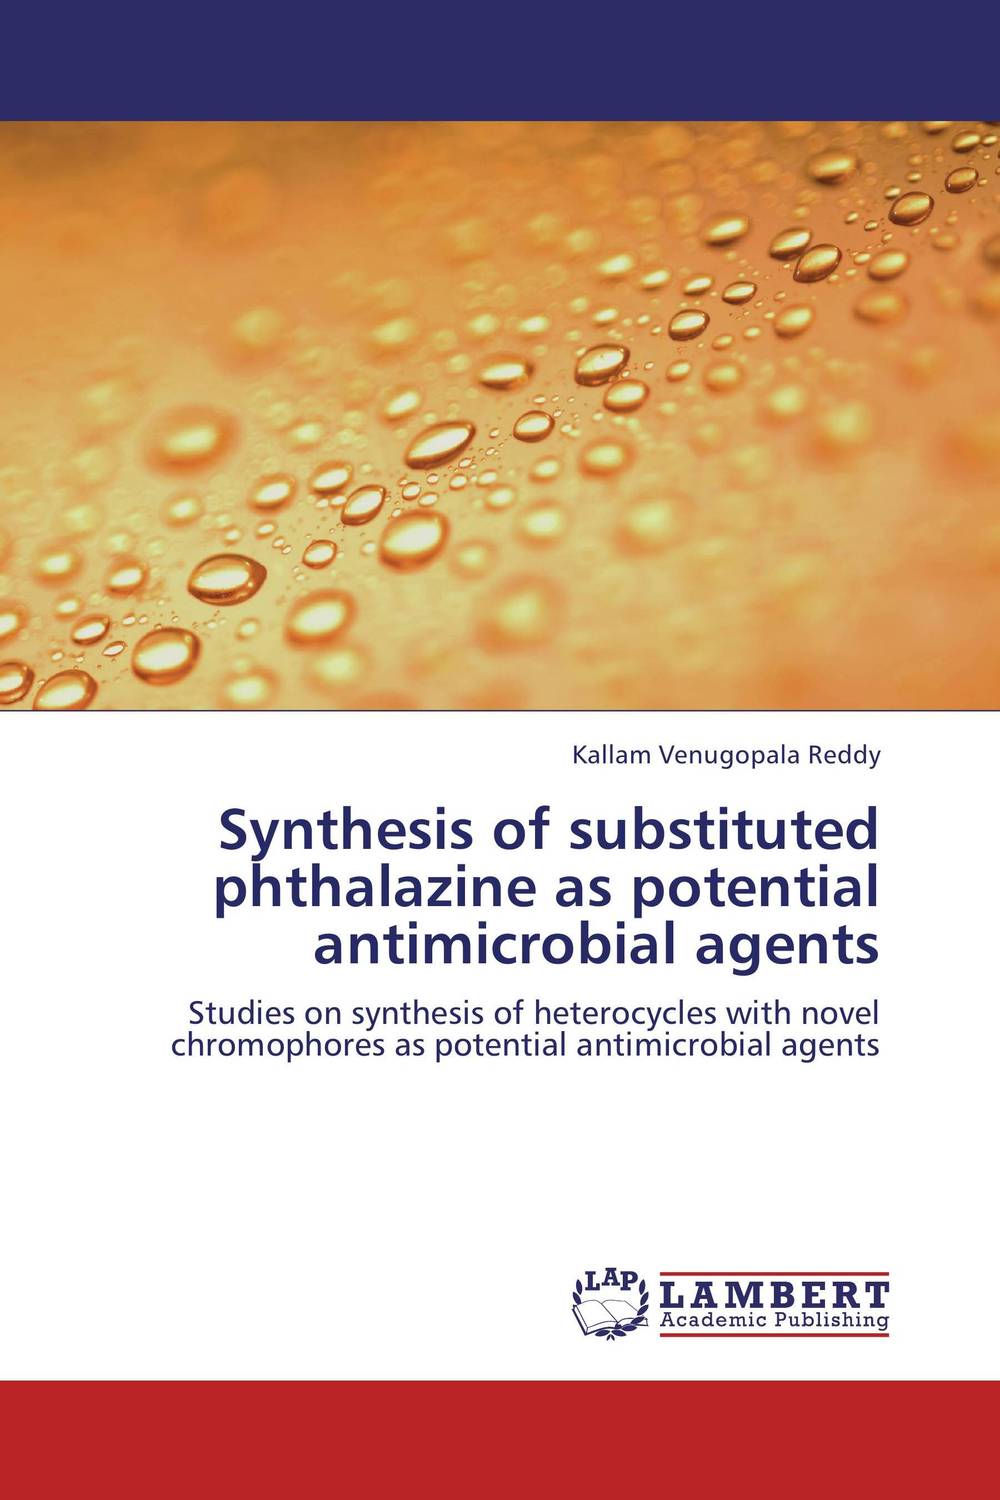 Synthesis of substituted phthalazine as potential antimicrobial agents